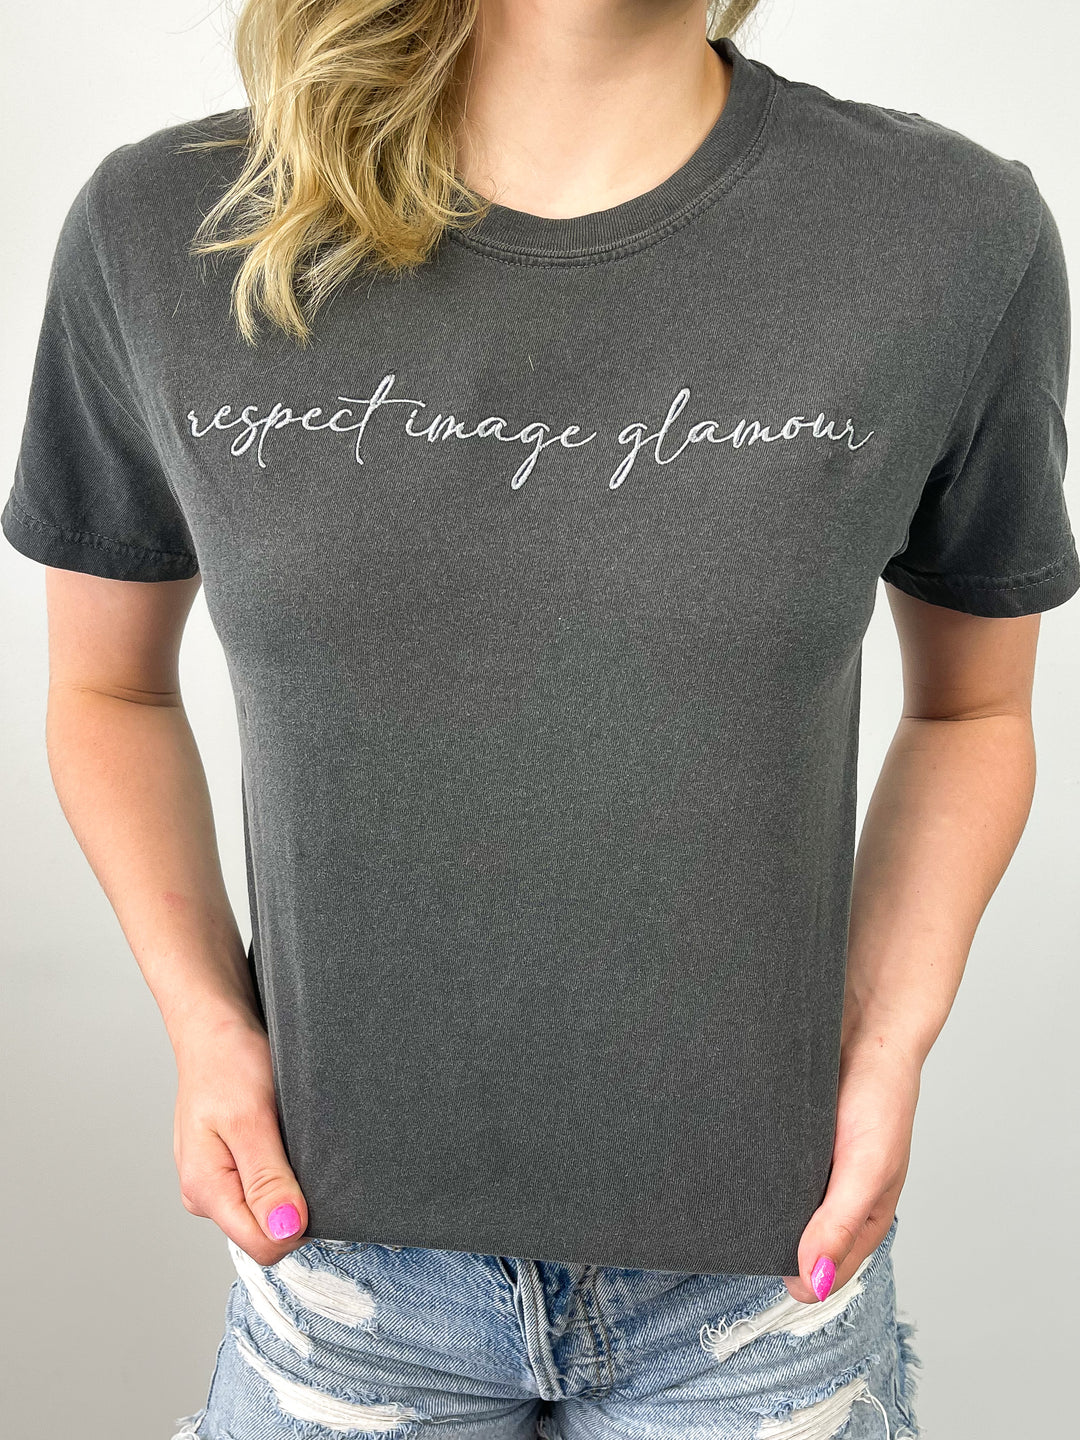 Respect. Image. Glamour. Tee